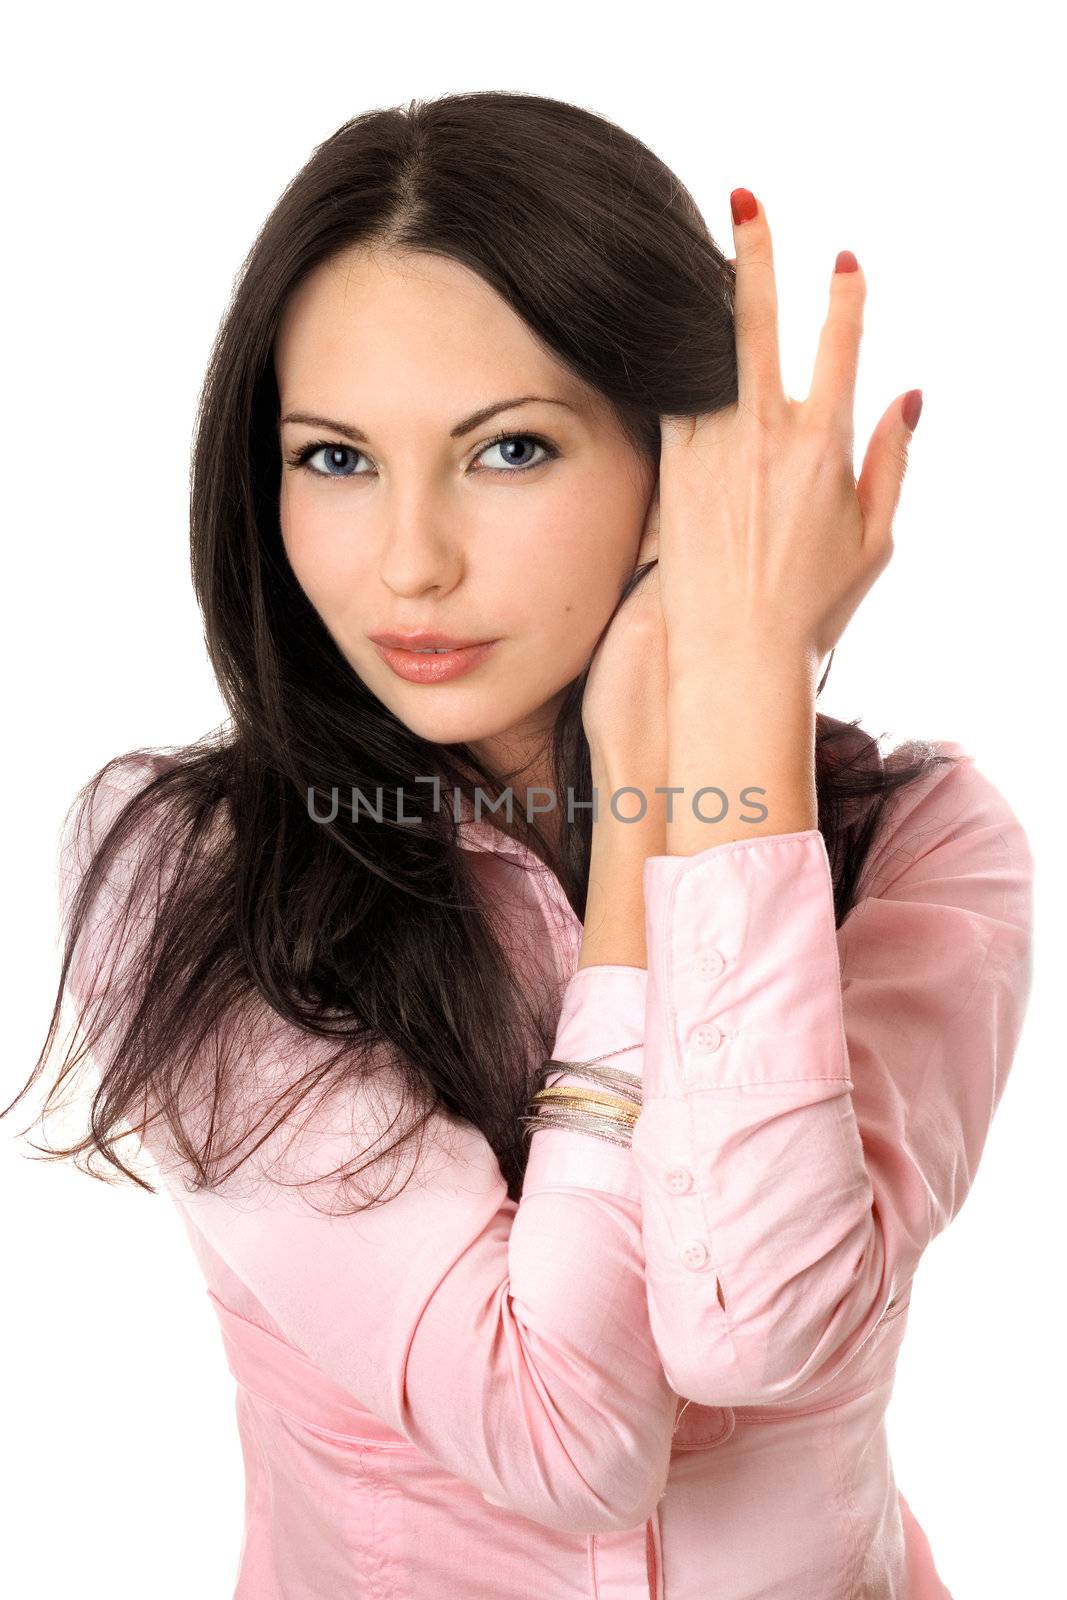 Portrait of playful young woman in pink shirt